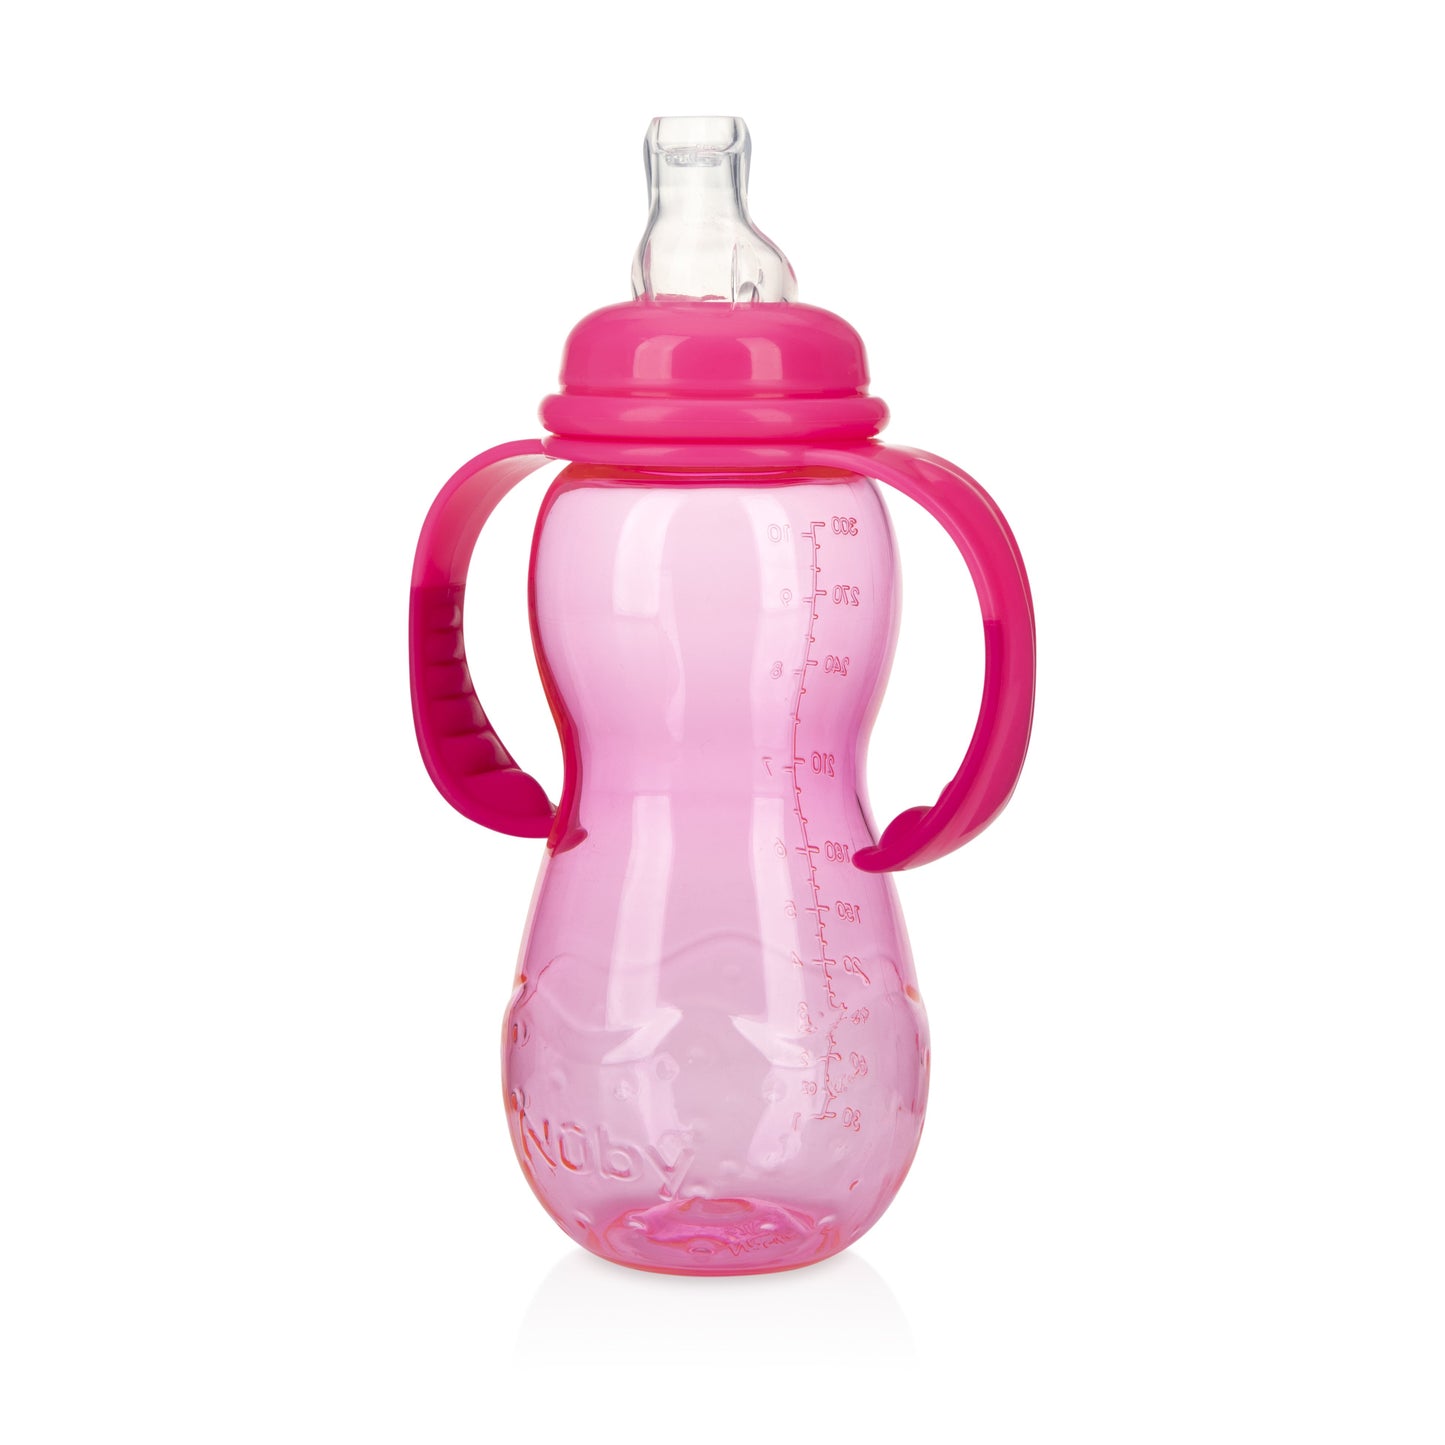 Nuby 3 Stage Grow with Me Bottle to Cup 11oz Pink